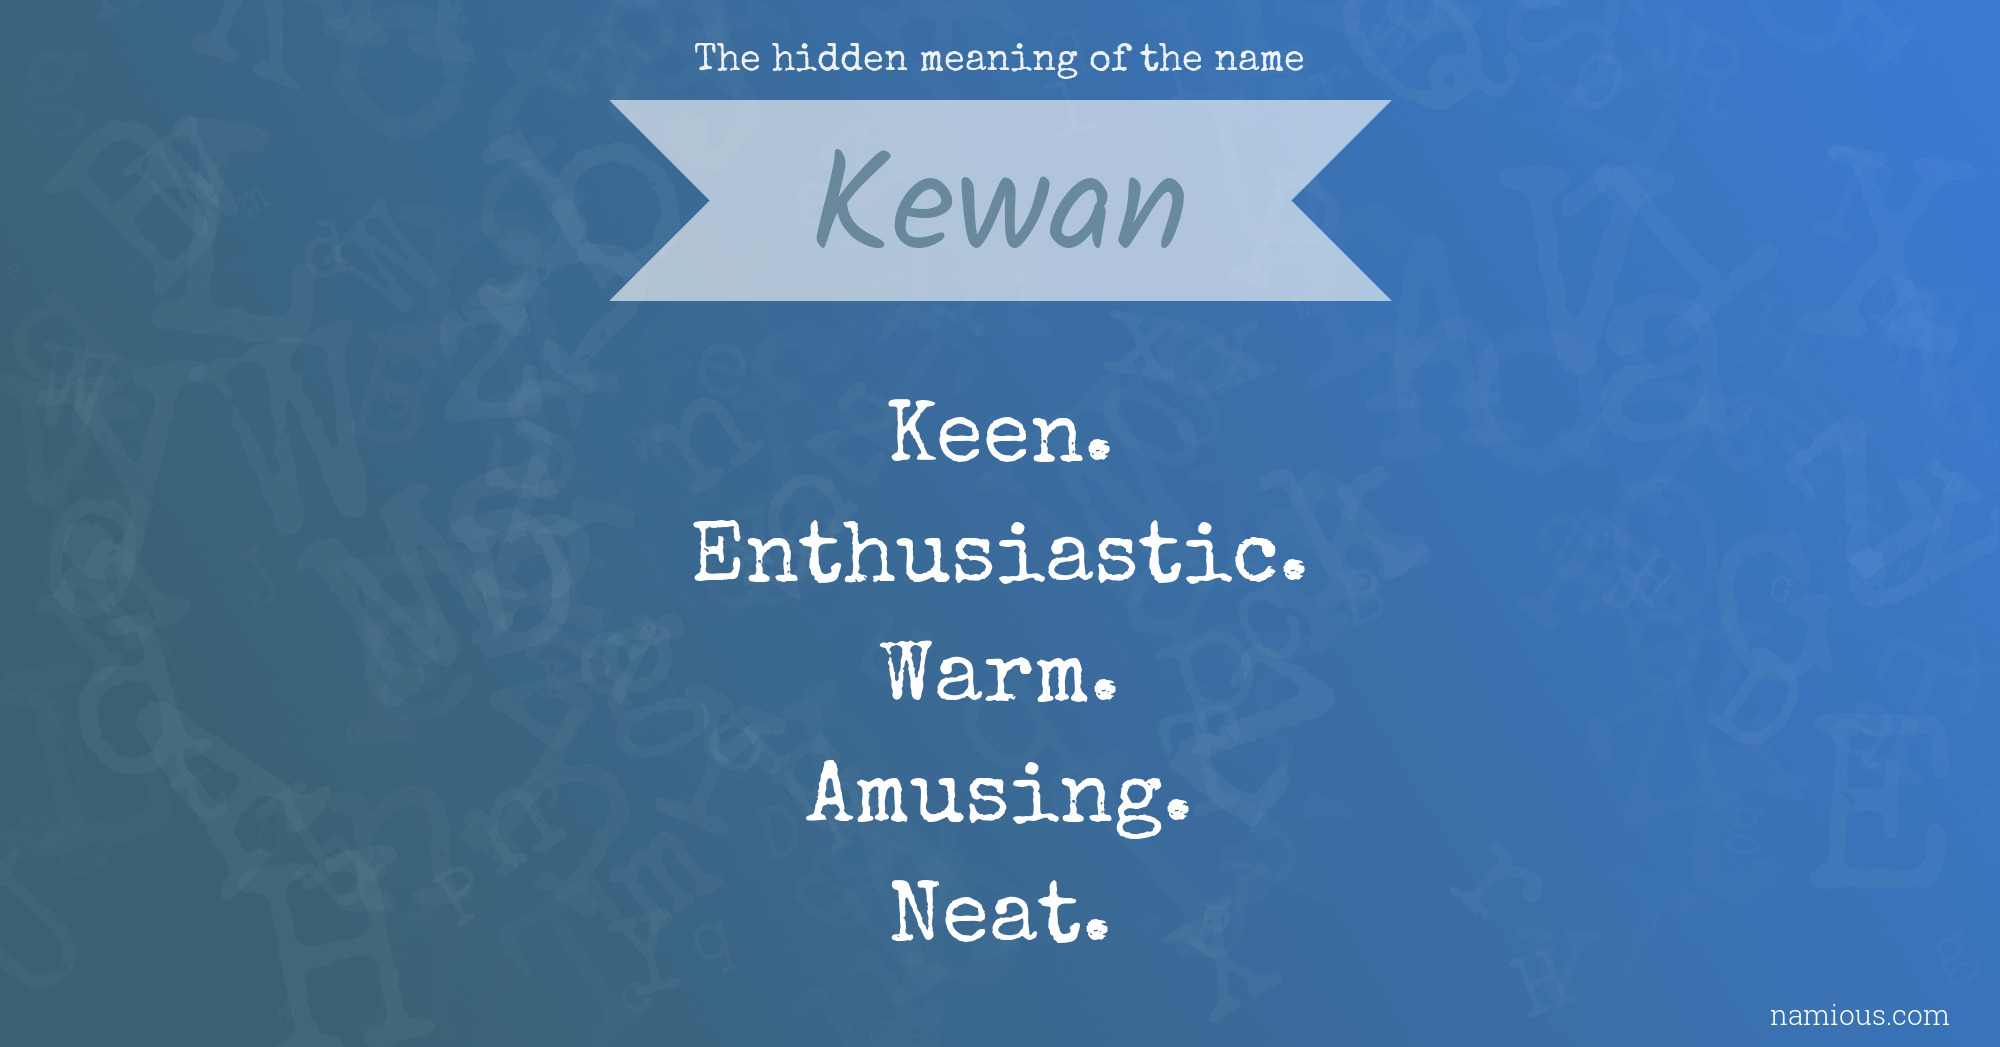 The hidden meaning of the name Kewan